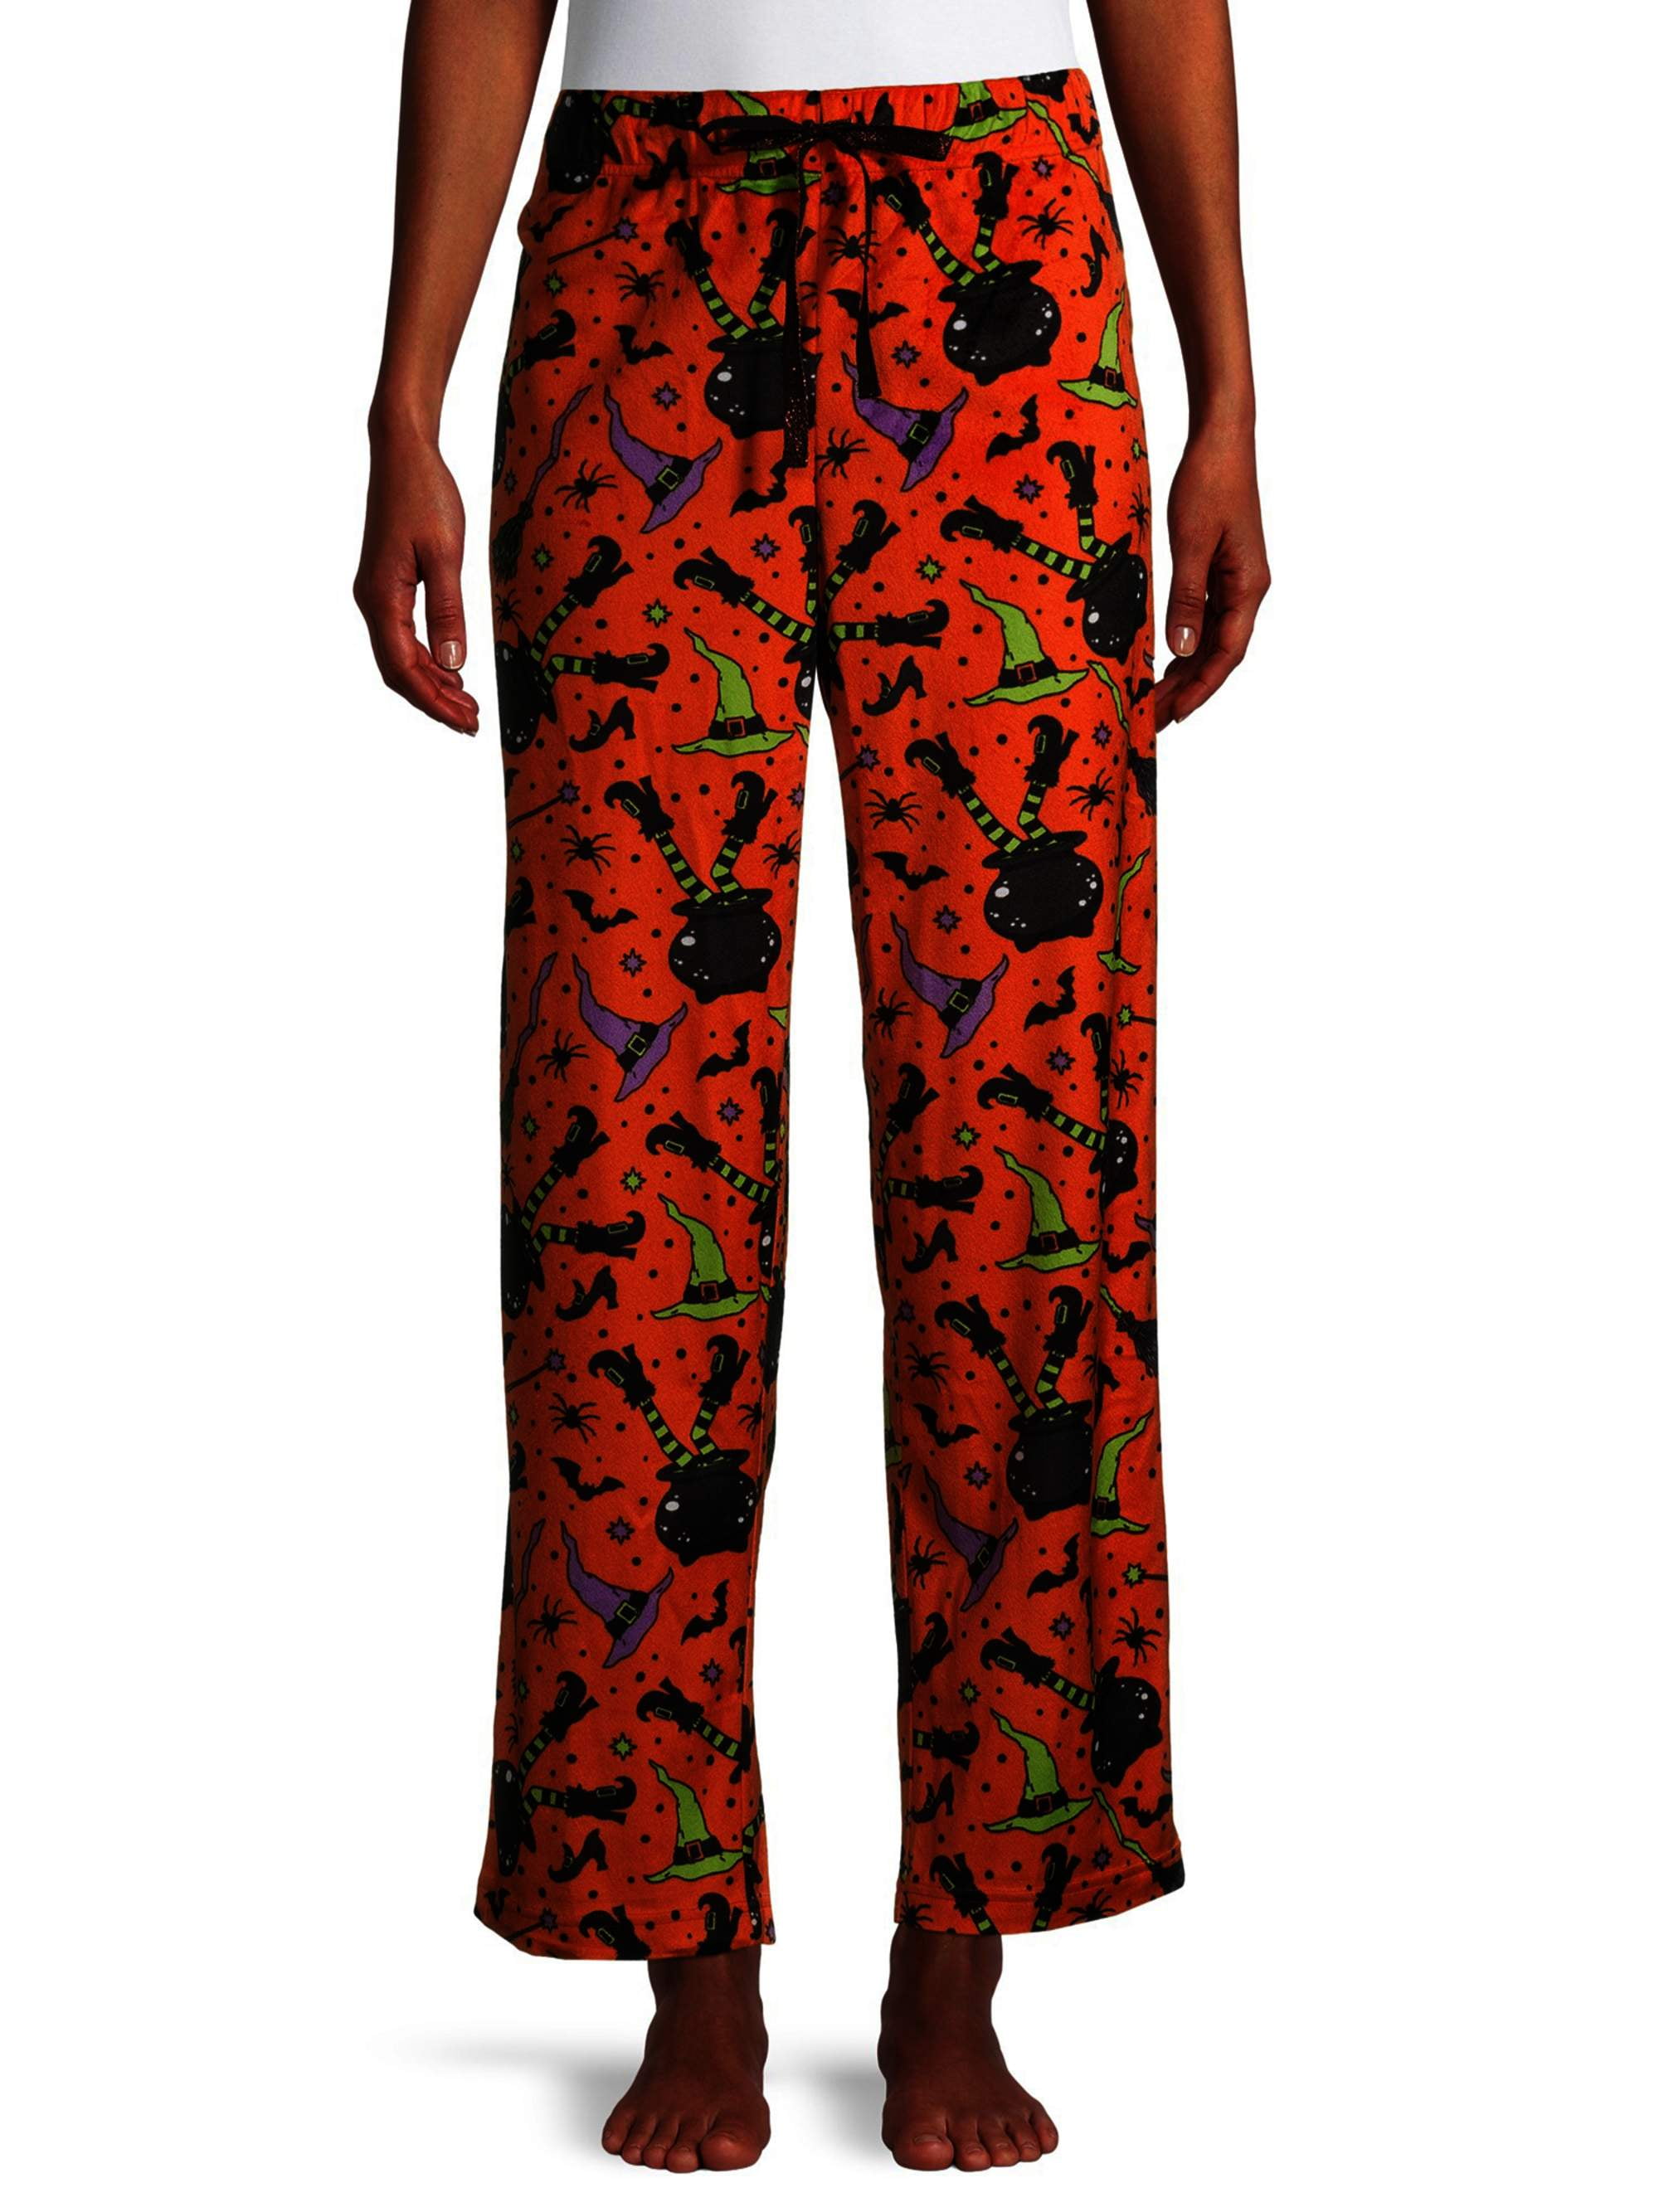 Briefly Stated Womens Nightmare Before Christmas Cuffed Sleep Pant